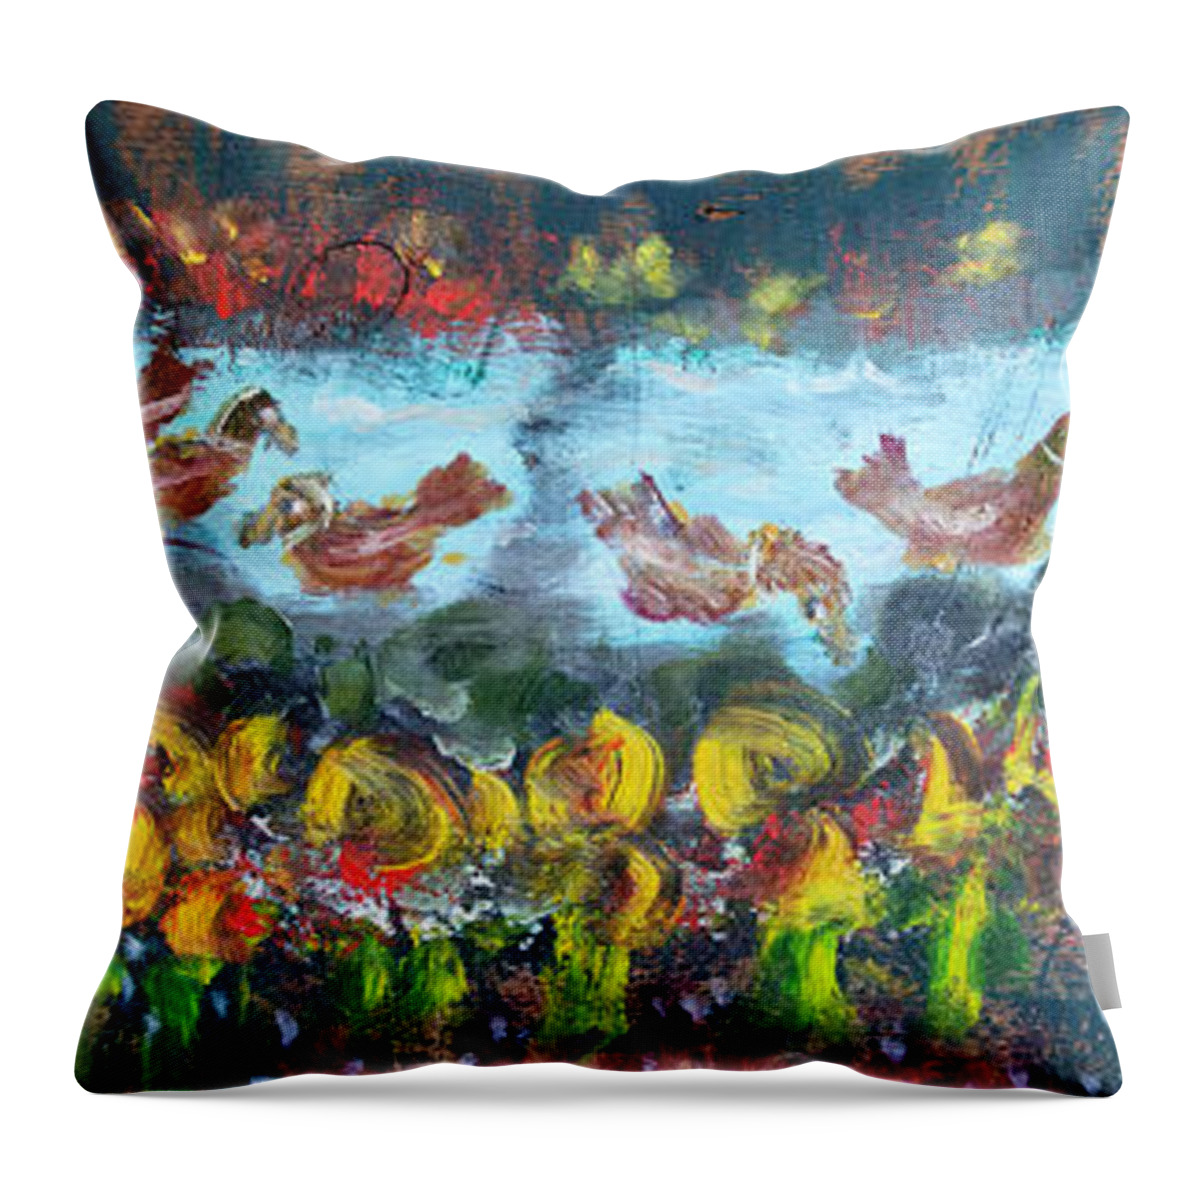  Throw Pillow featuring the painting Duck Pond by David McCready